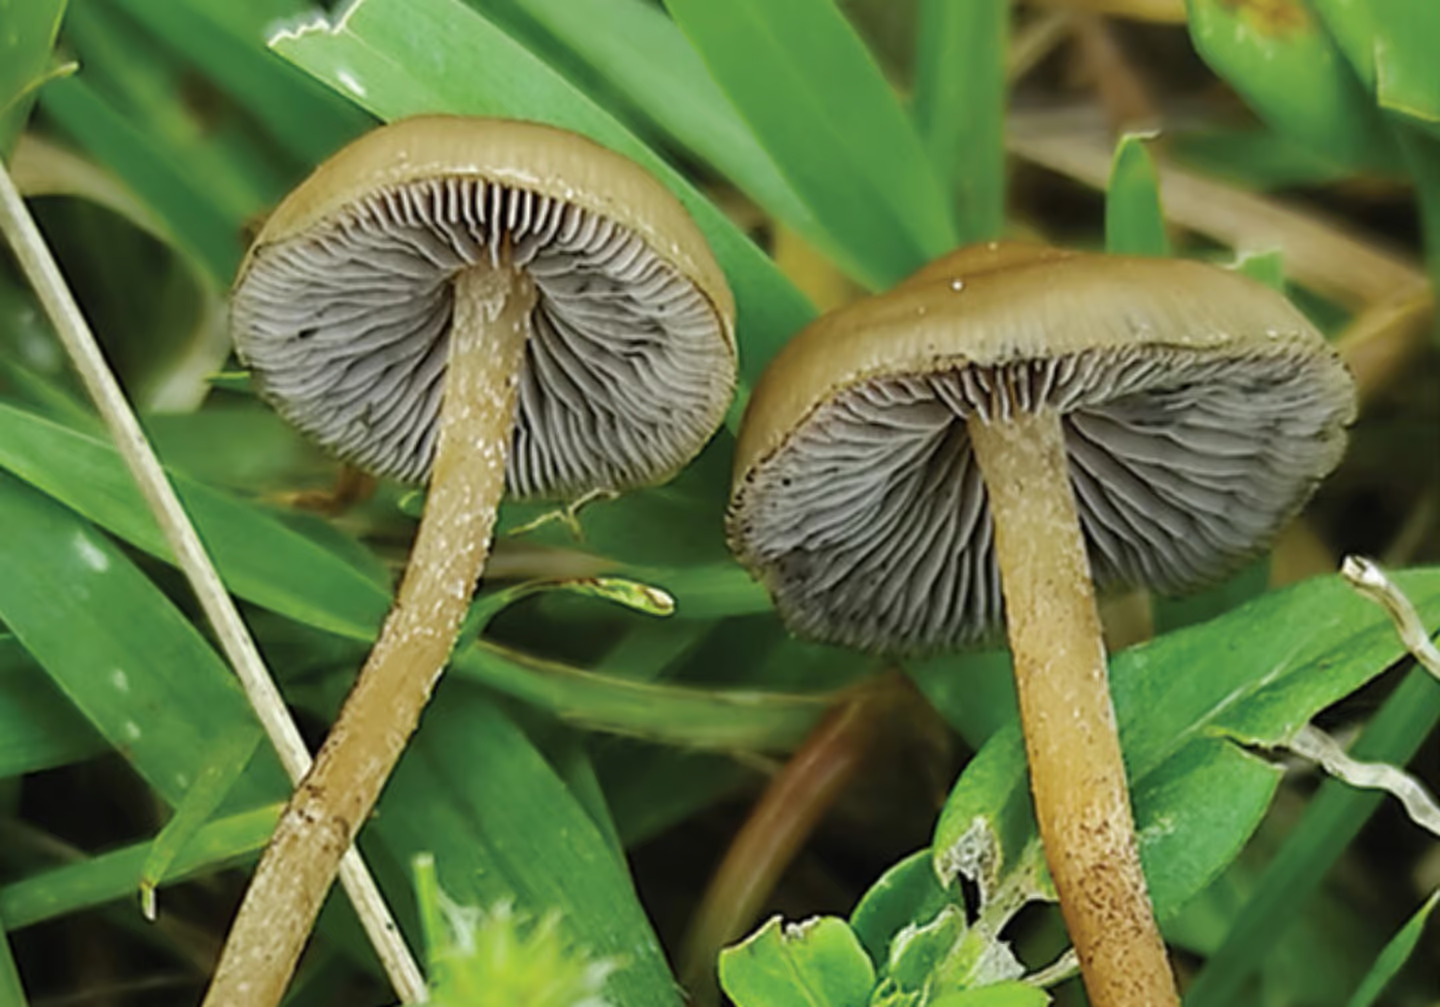 Two new hallucinogenic mushroom species discovered by fungi fans